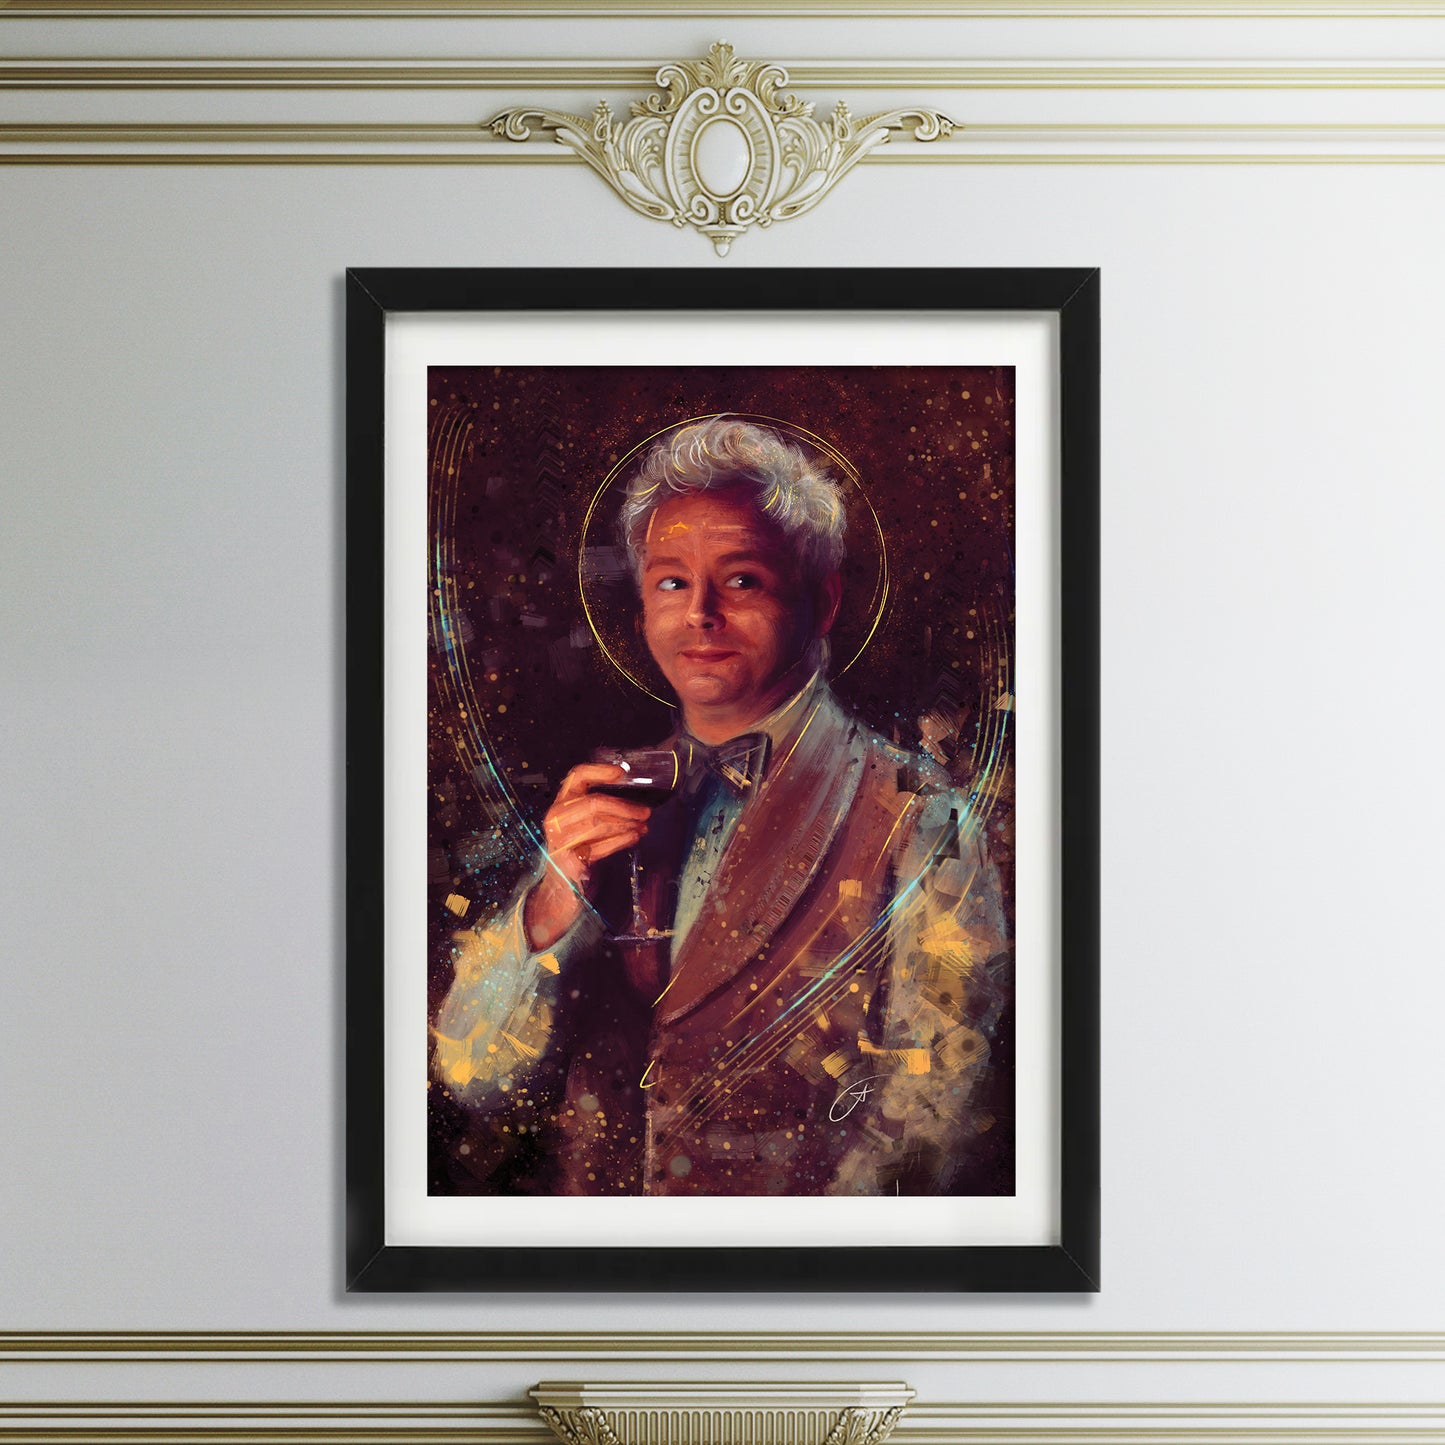 A black-framed picture on a white wall. The picture depicts the character Aziraphale from the TV series "Good Omens," wearing a white suit and holding a glass of red wine and surrounded by white and gold swirls. Above and below the framed picture is ornate crown moulding.